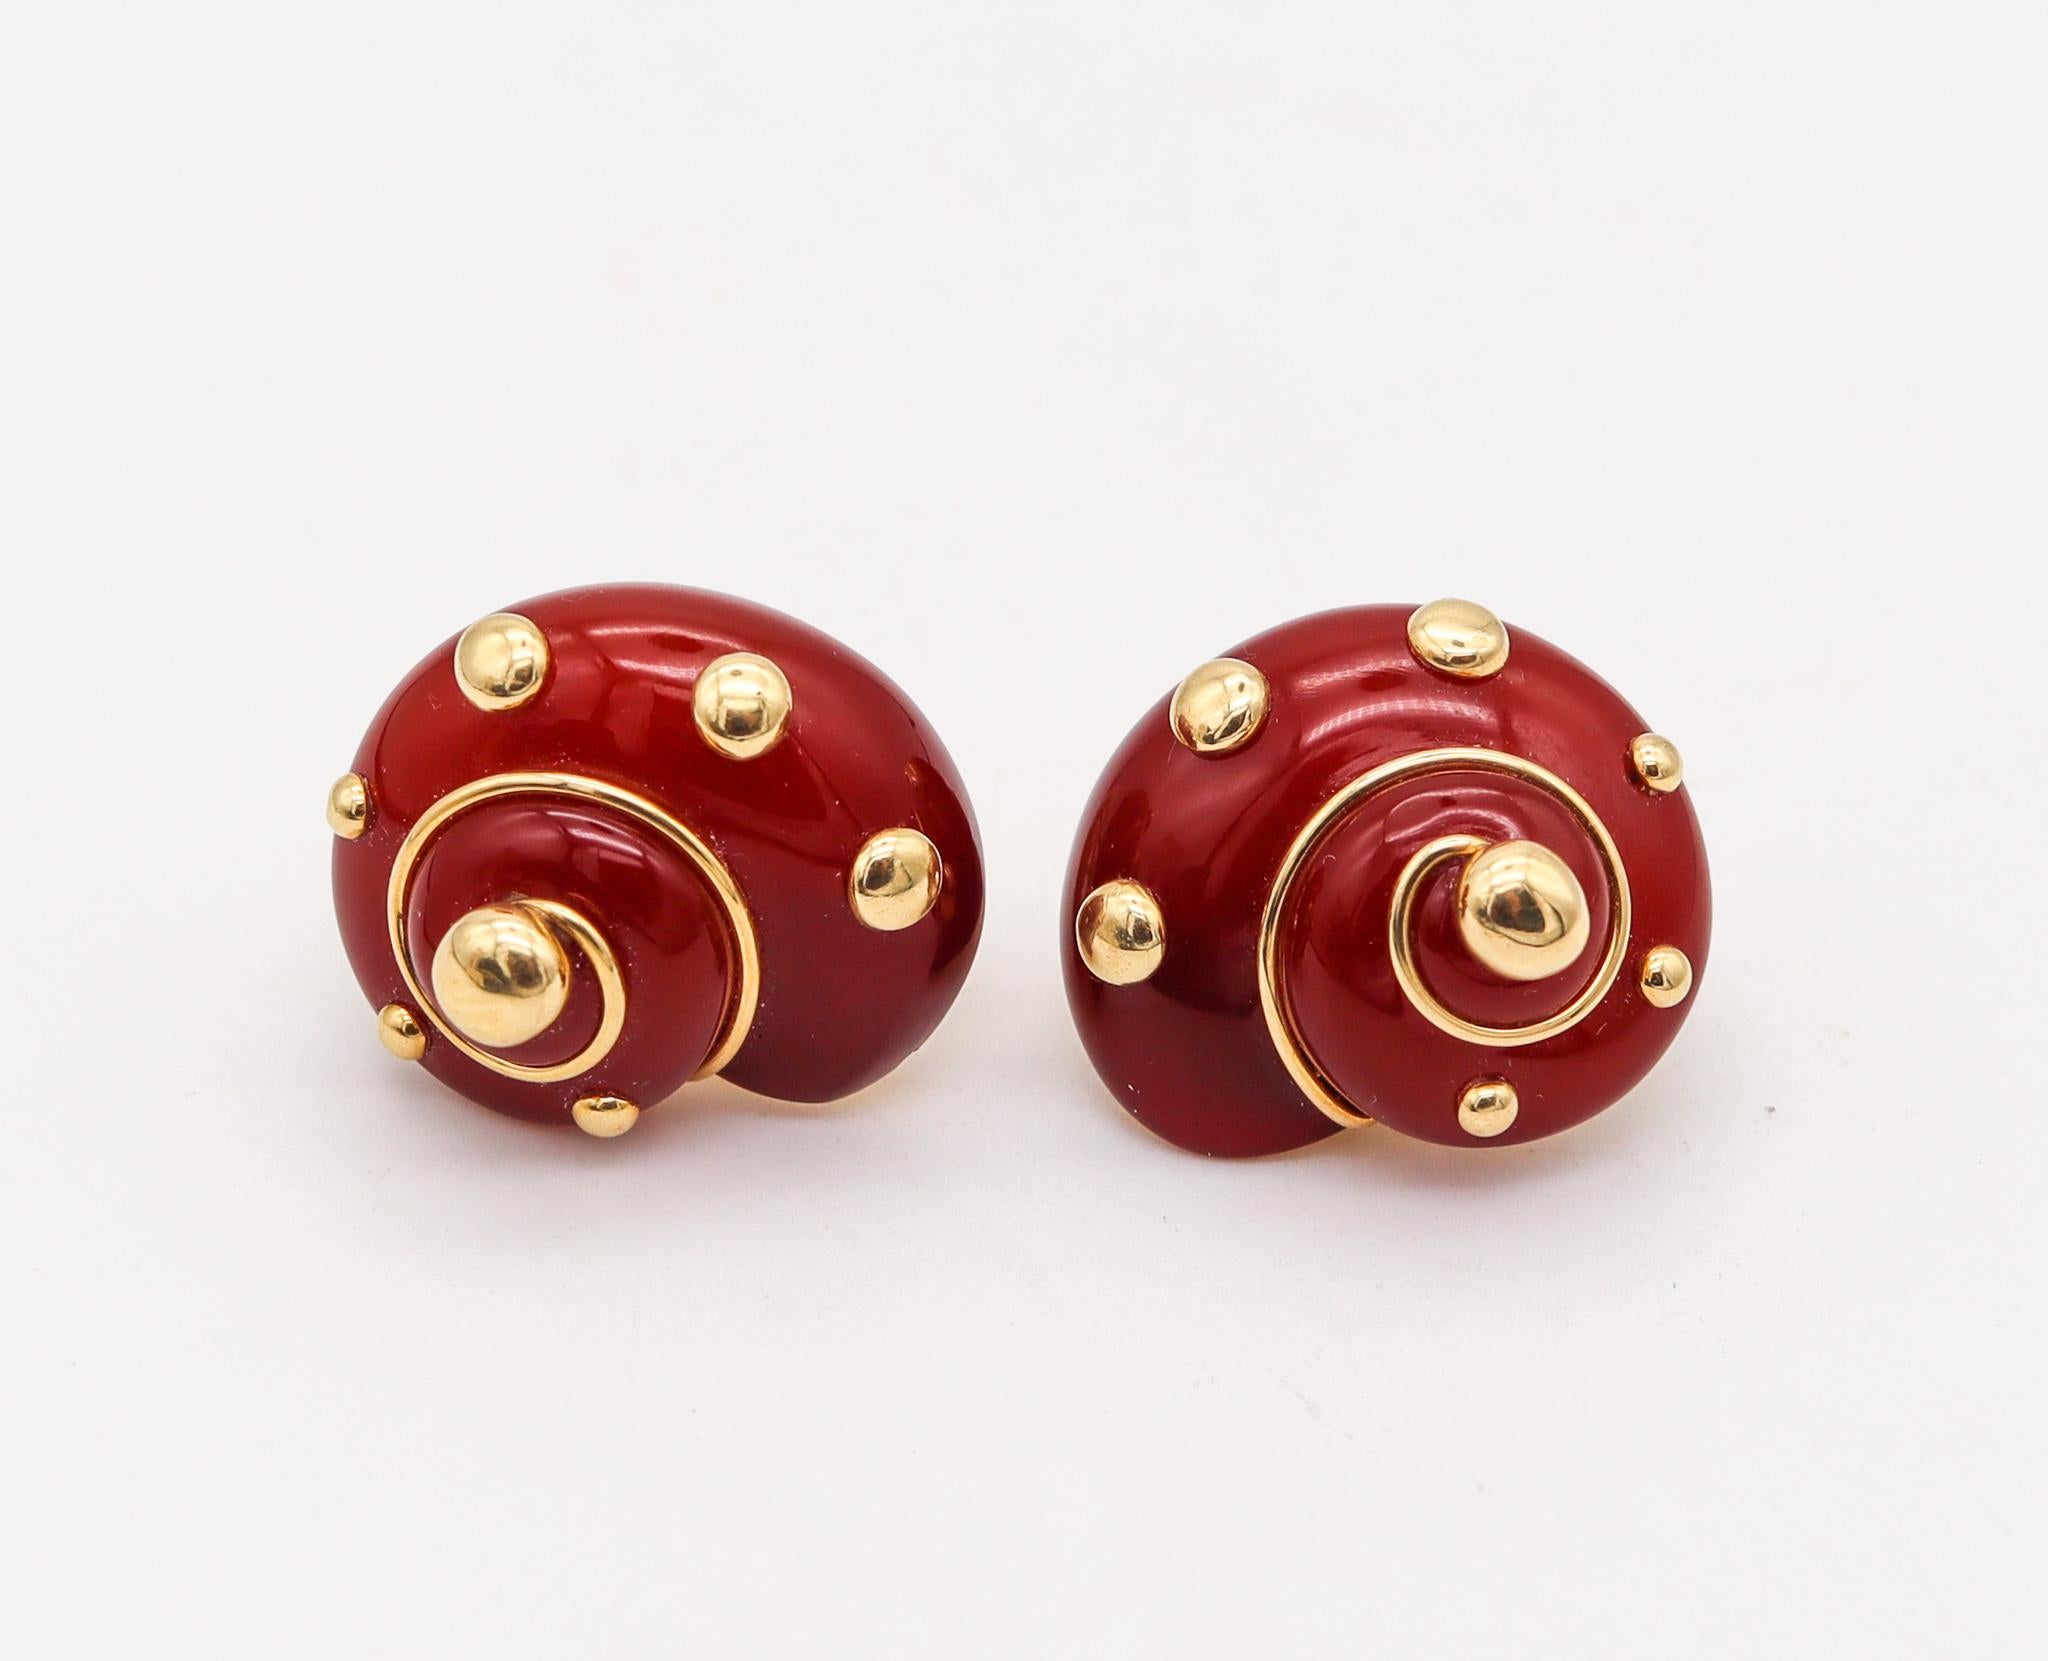 Free form pair of clip-earrings designed by Verdura.

A beautiful pair of clips earrings, created in Milan Italy by the renowned jewelry house of Verdura. These aesthetic free form earclips has been crafted in solid yellow gold of 18 karats, with